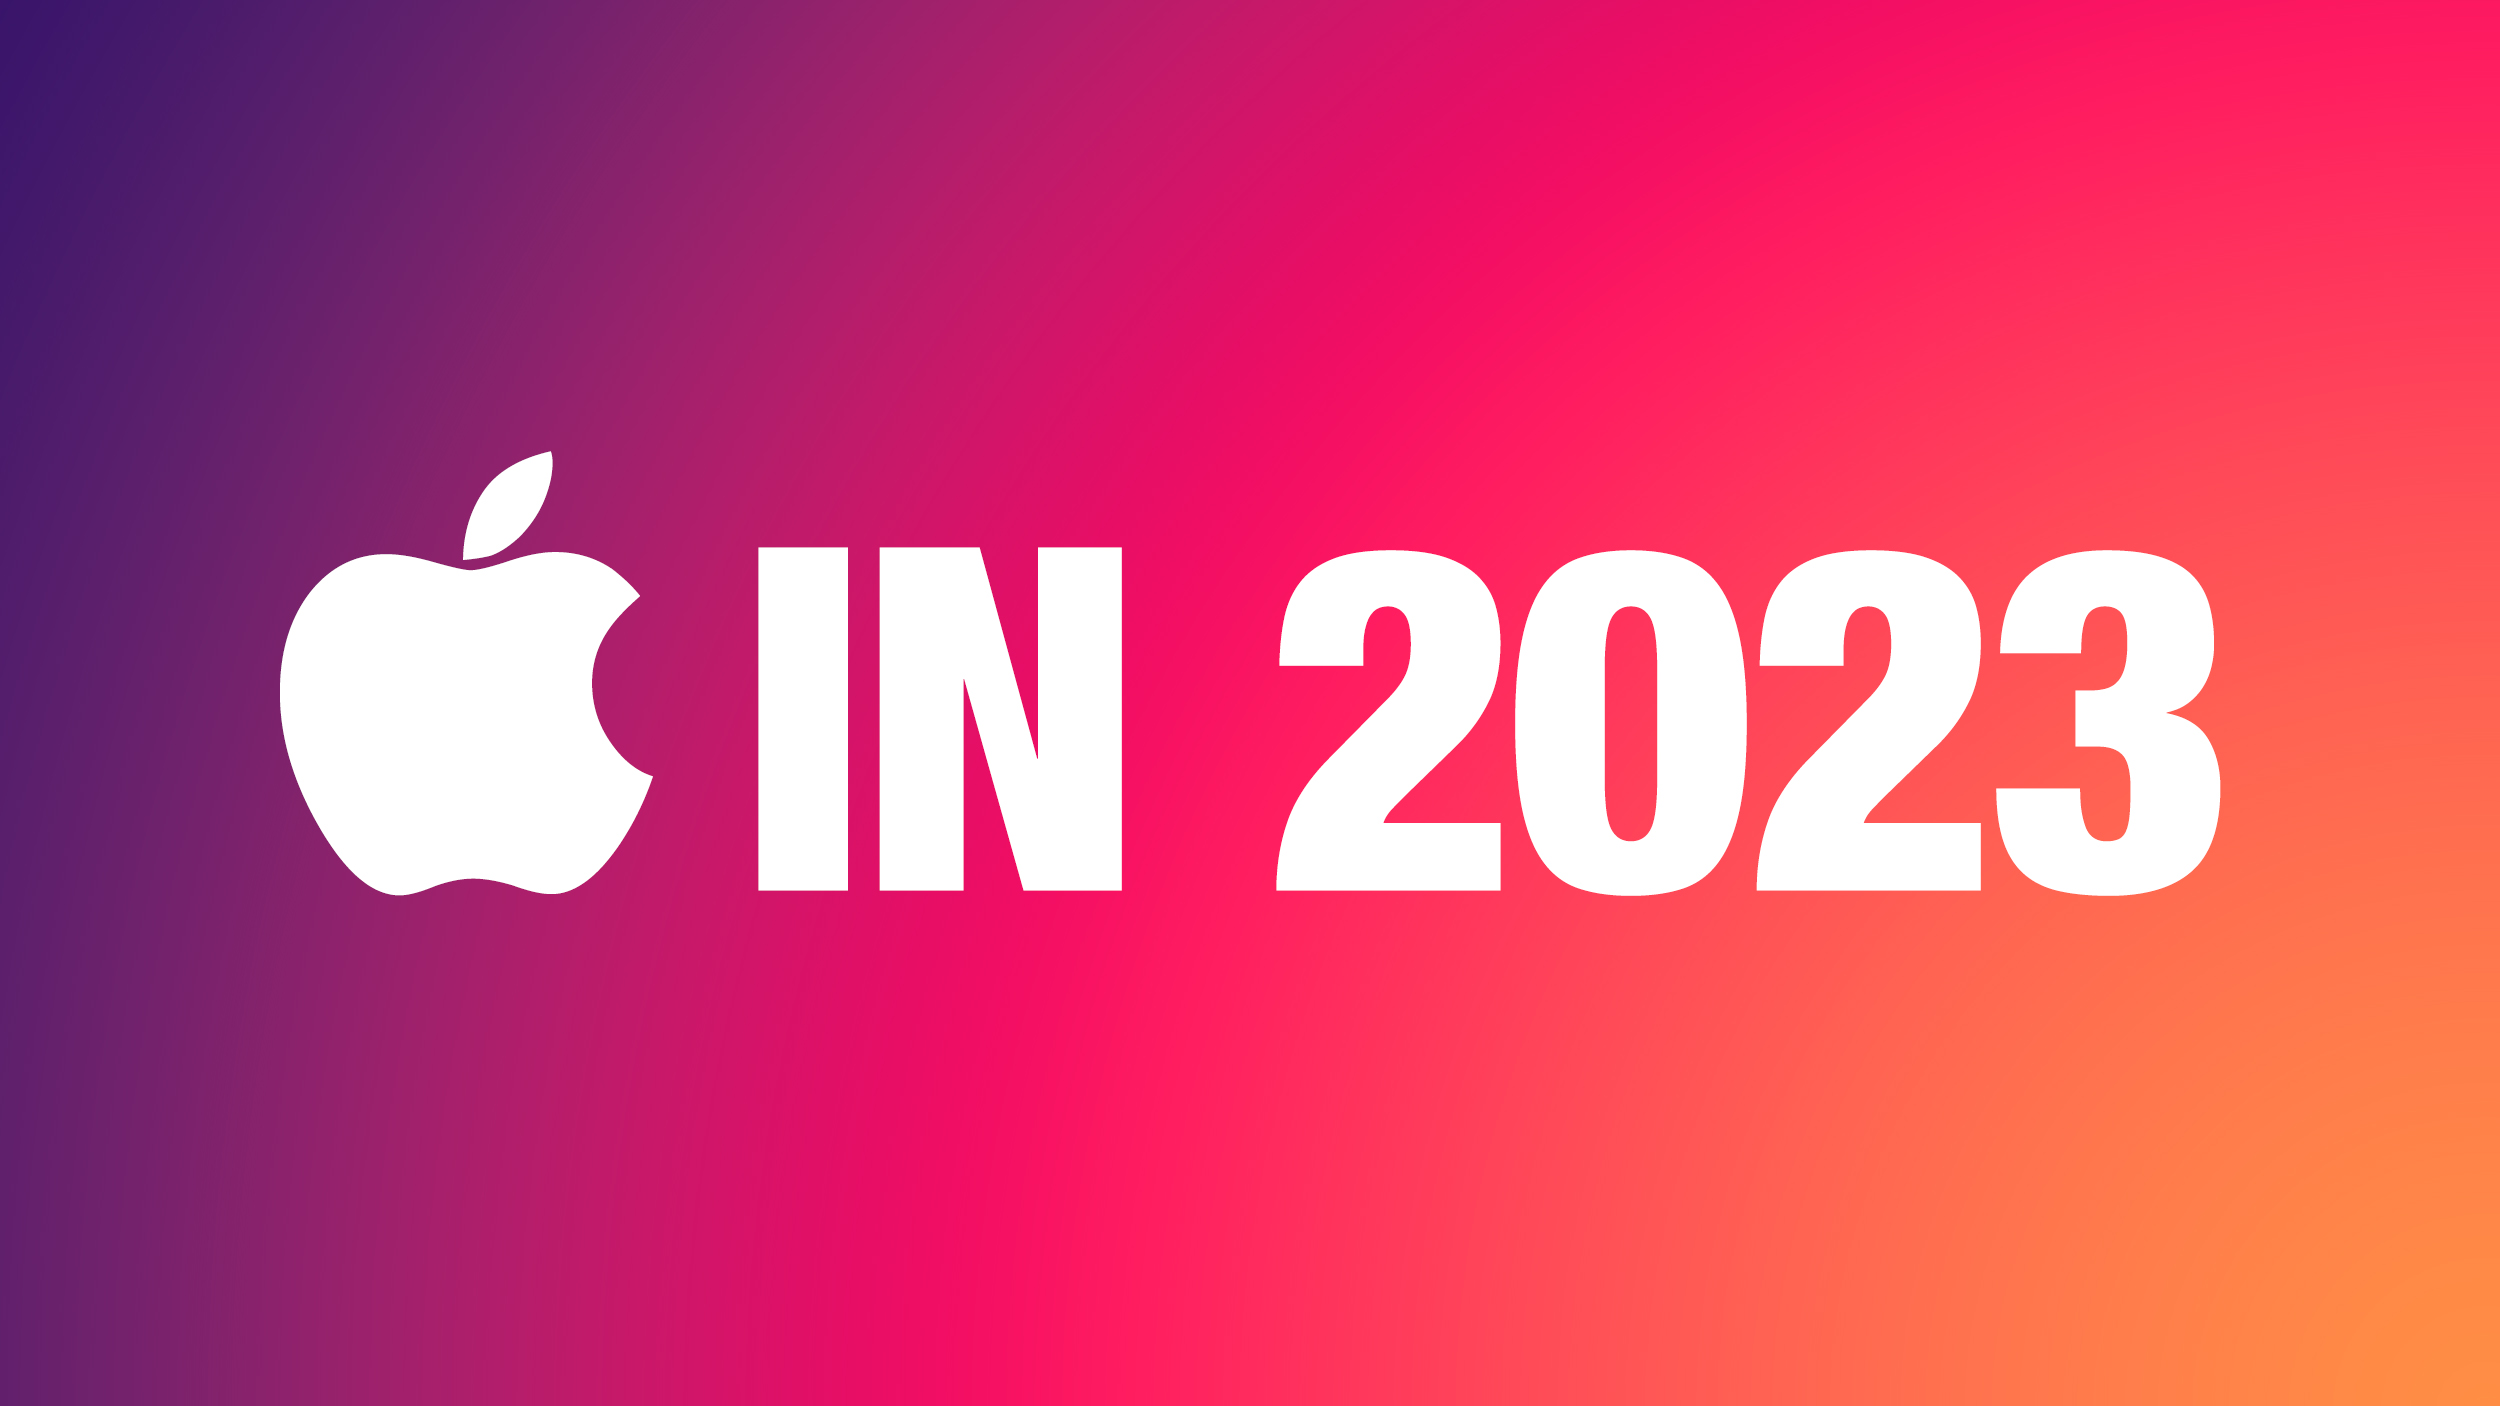 Apple in 2023: The Biggest News Stories and Surprises of the Year